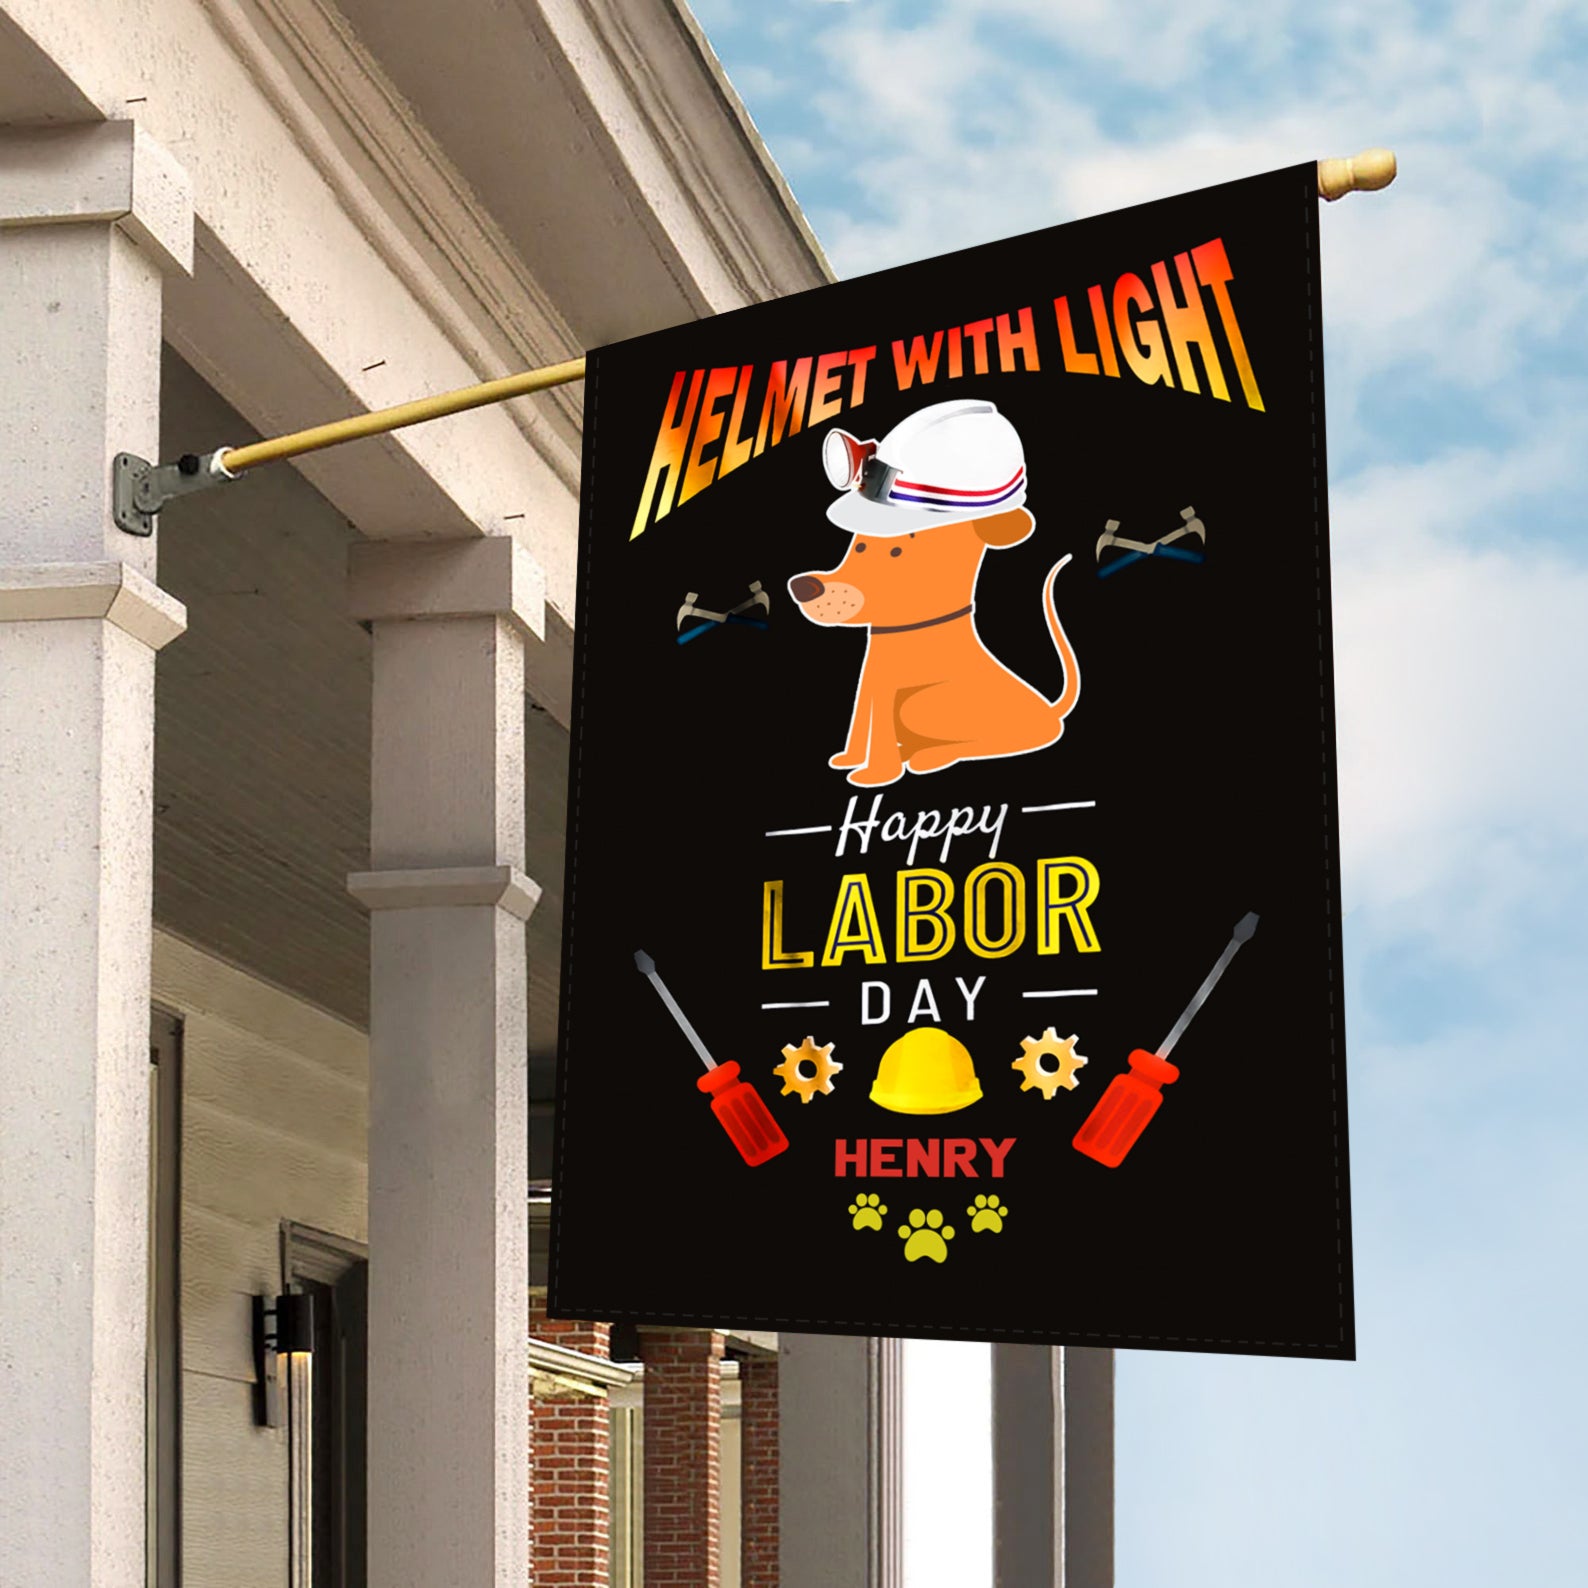 Personalized Dog Gift Idea - Helmet With Light Happy Labor Day For Dog Lovers - Garden Flag